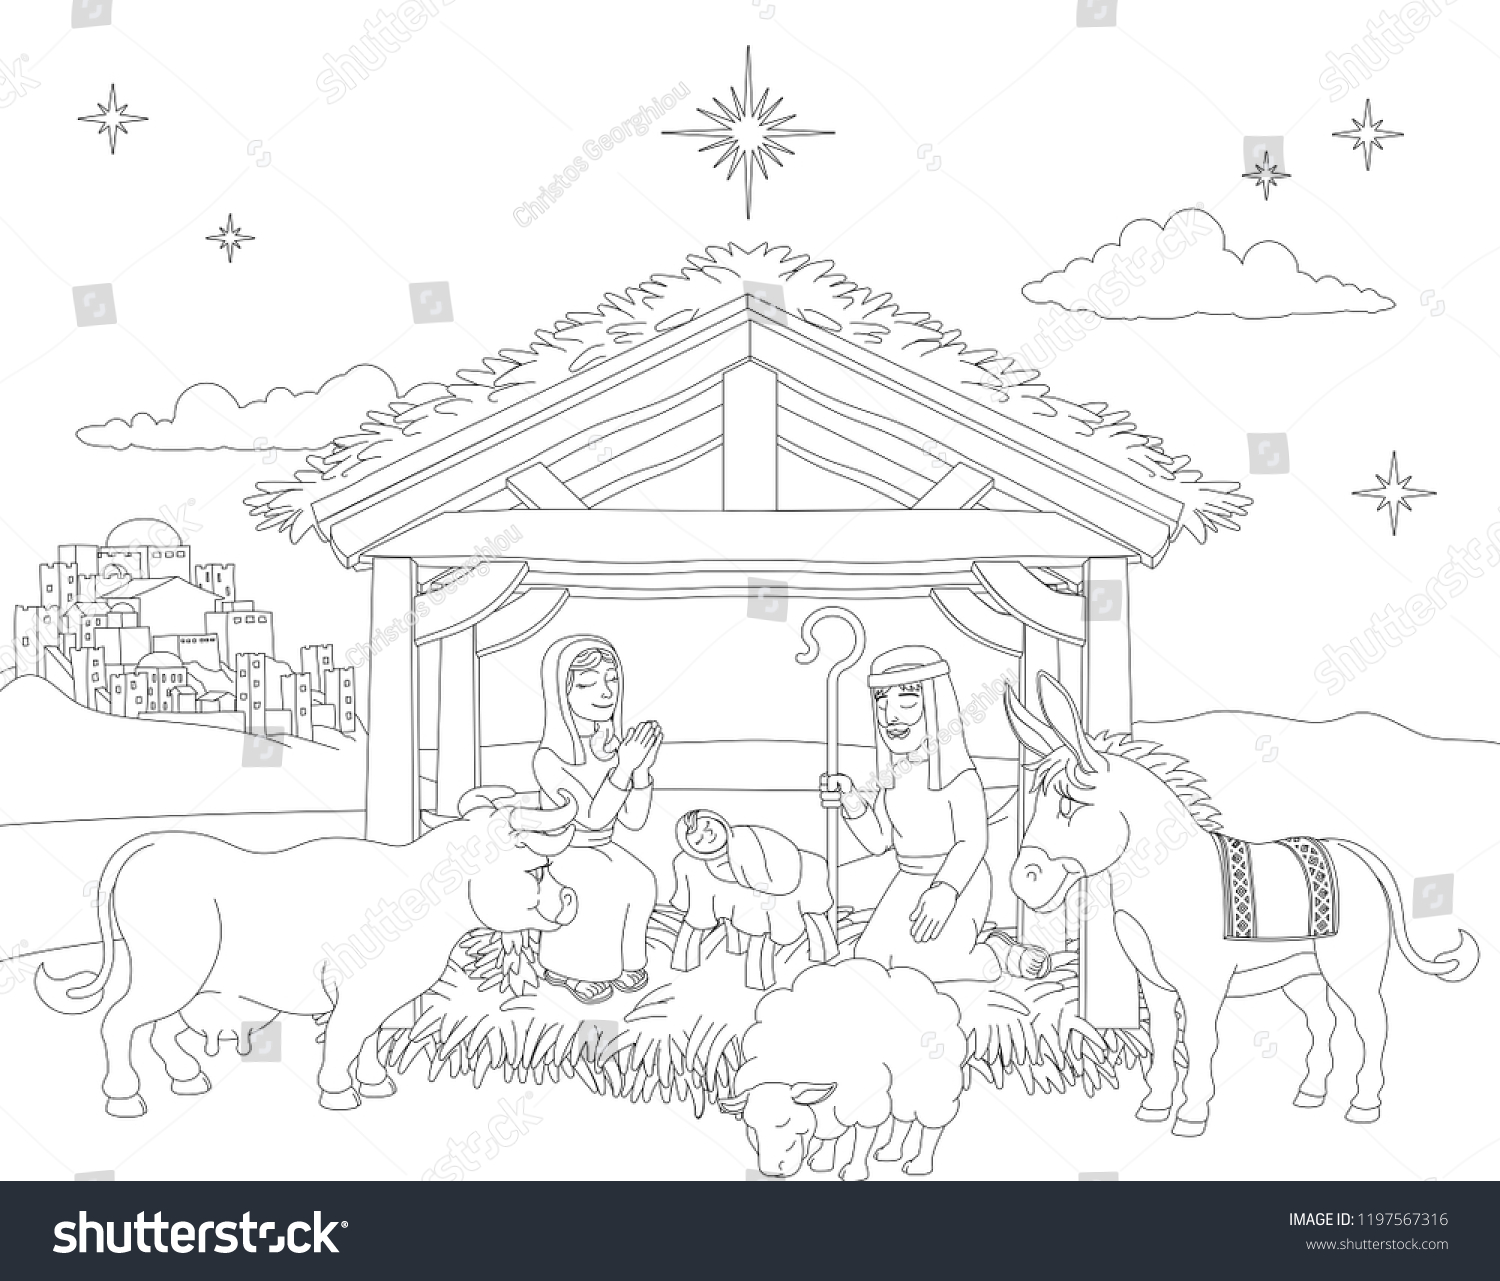 A Christmas nativity coloring scene cartoon, with baby Jesus, Mary and Joseph in the manger with donkey and other animals. The City of Bethlehem and star above. Christian religious illustration. #1197567316